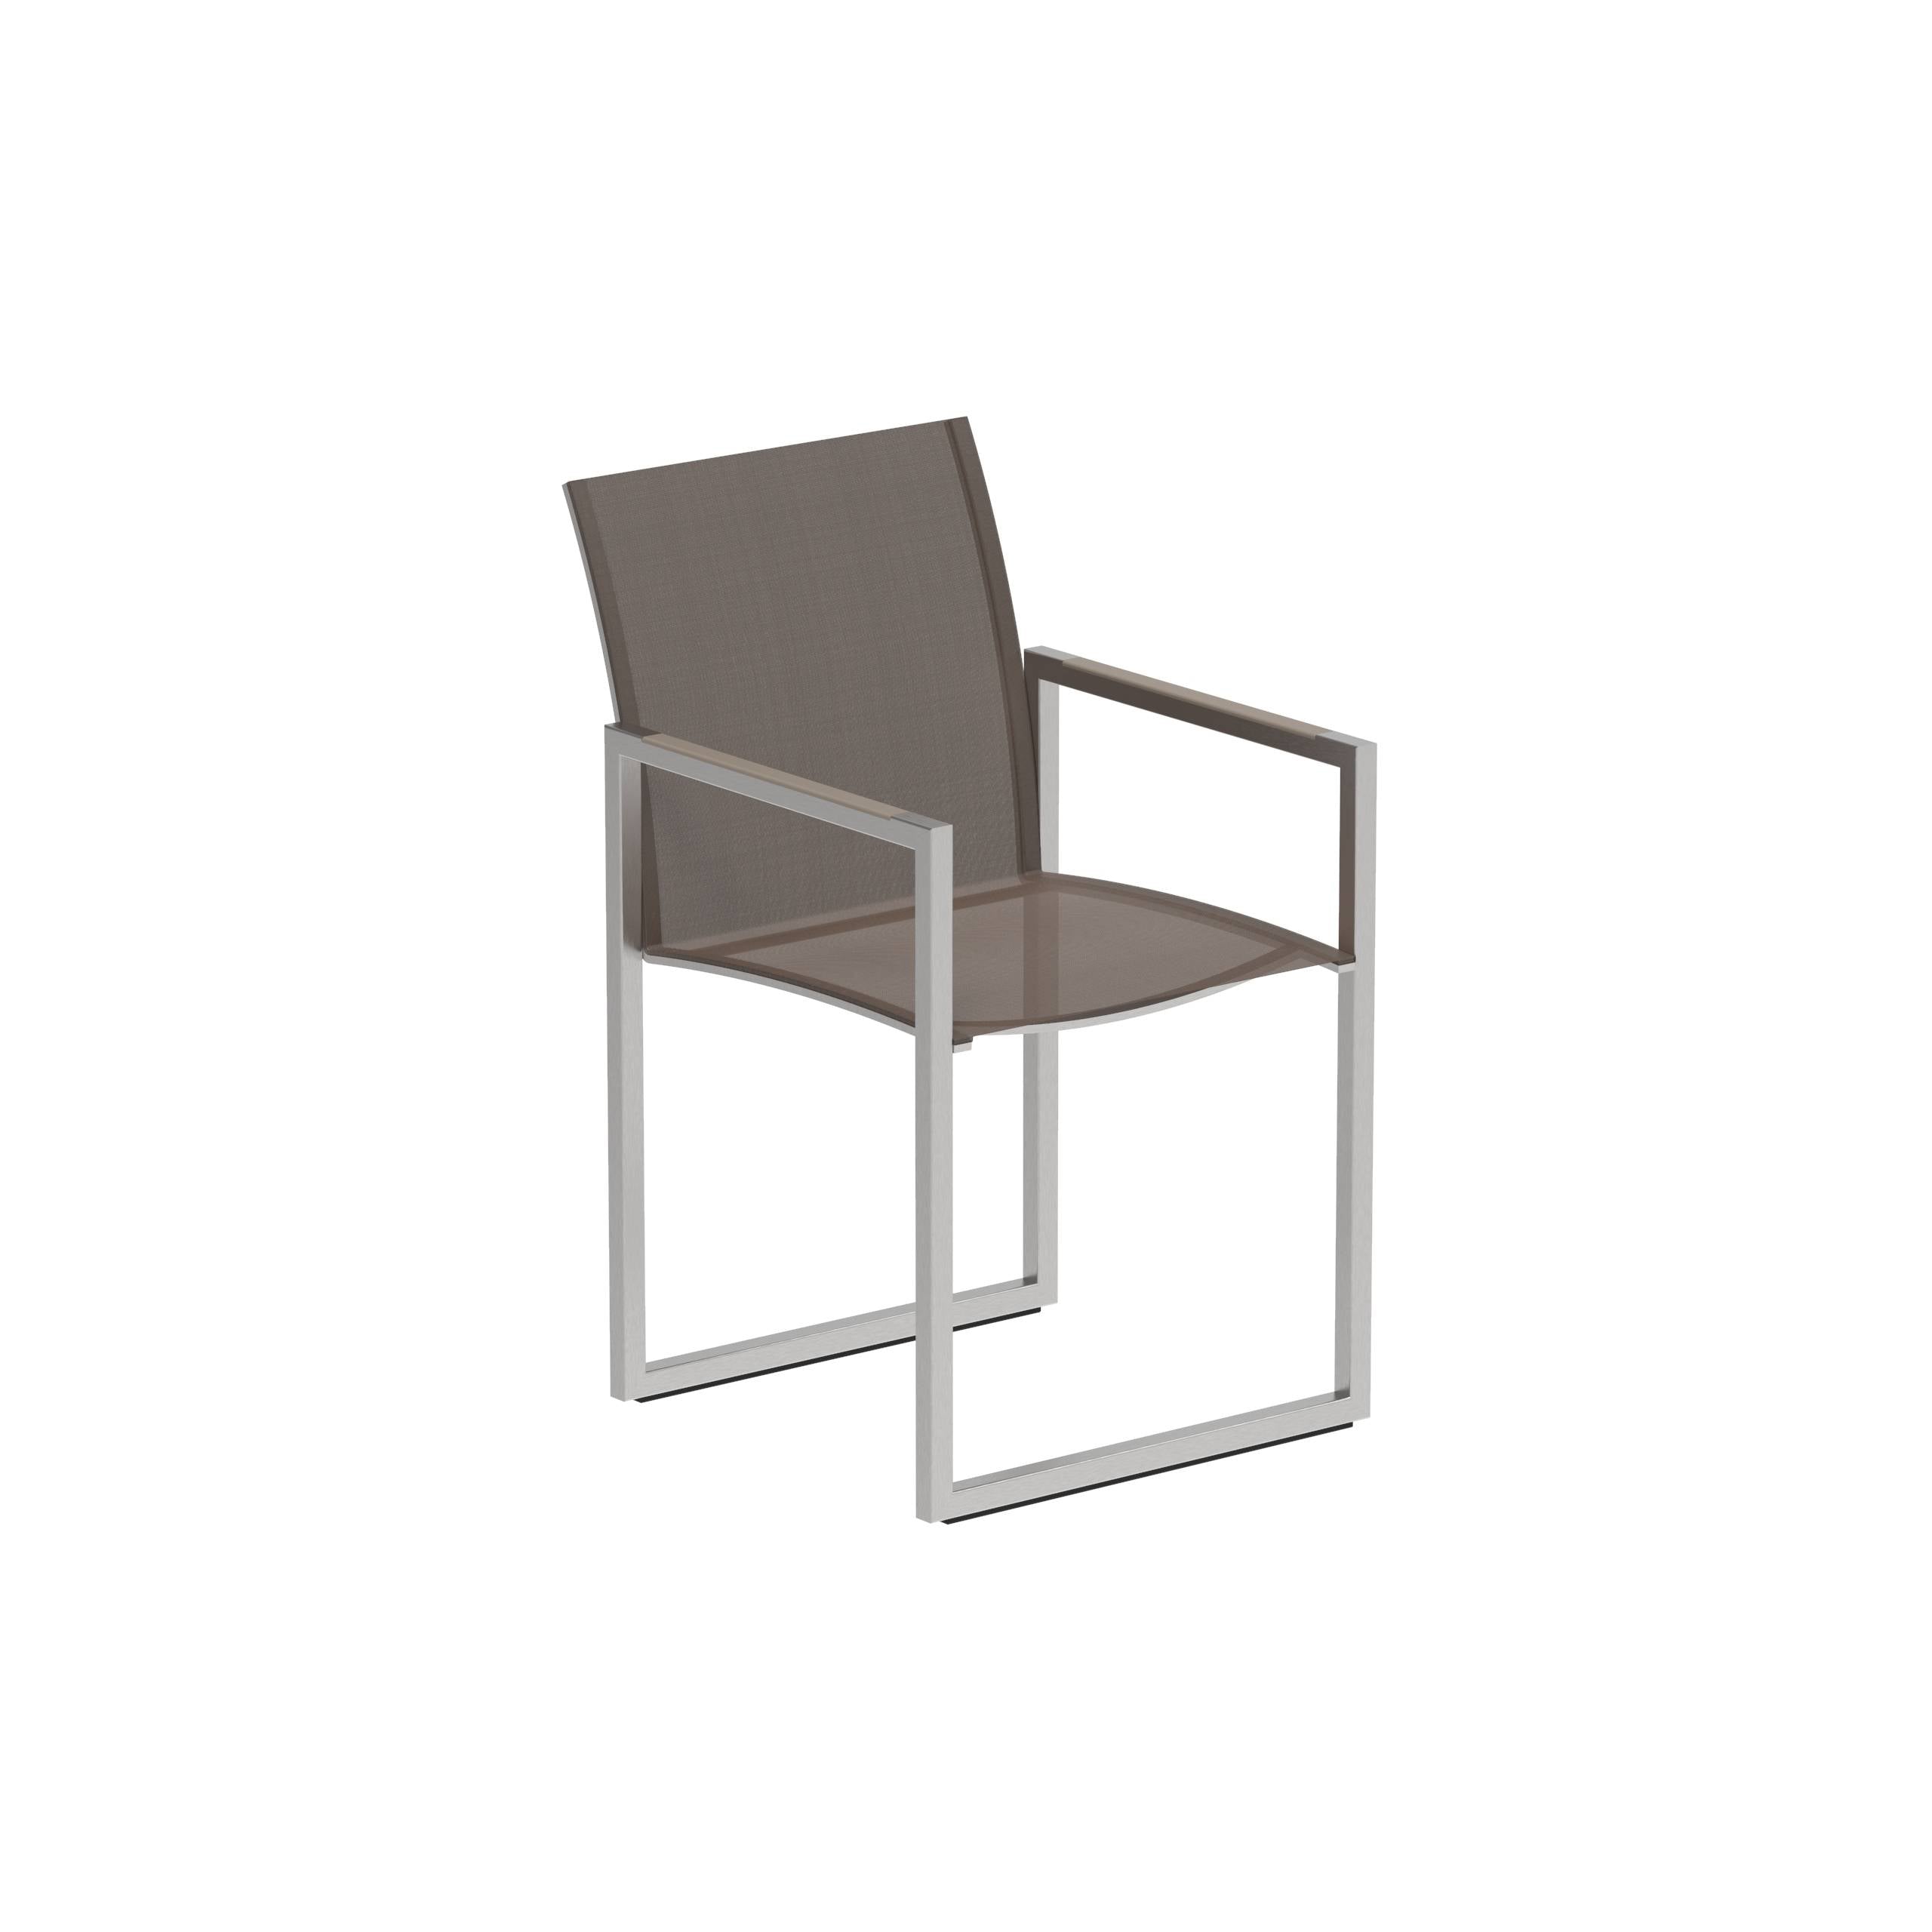 Ninix Armchair Stainless Steel And Batyline Cappuccino